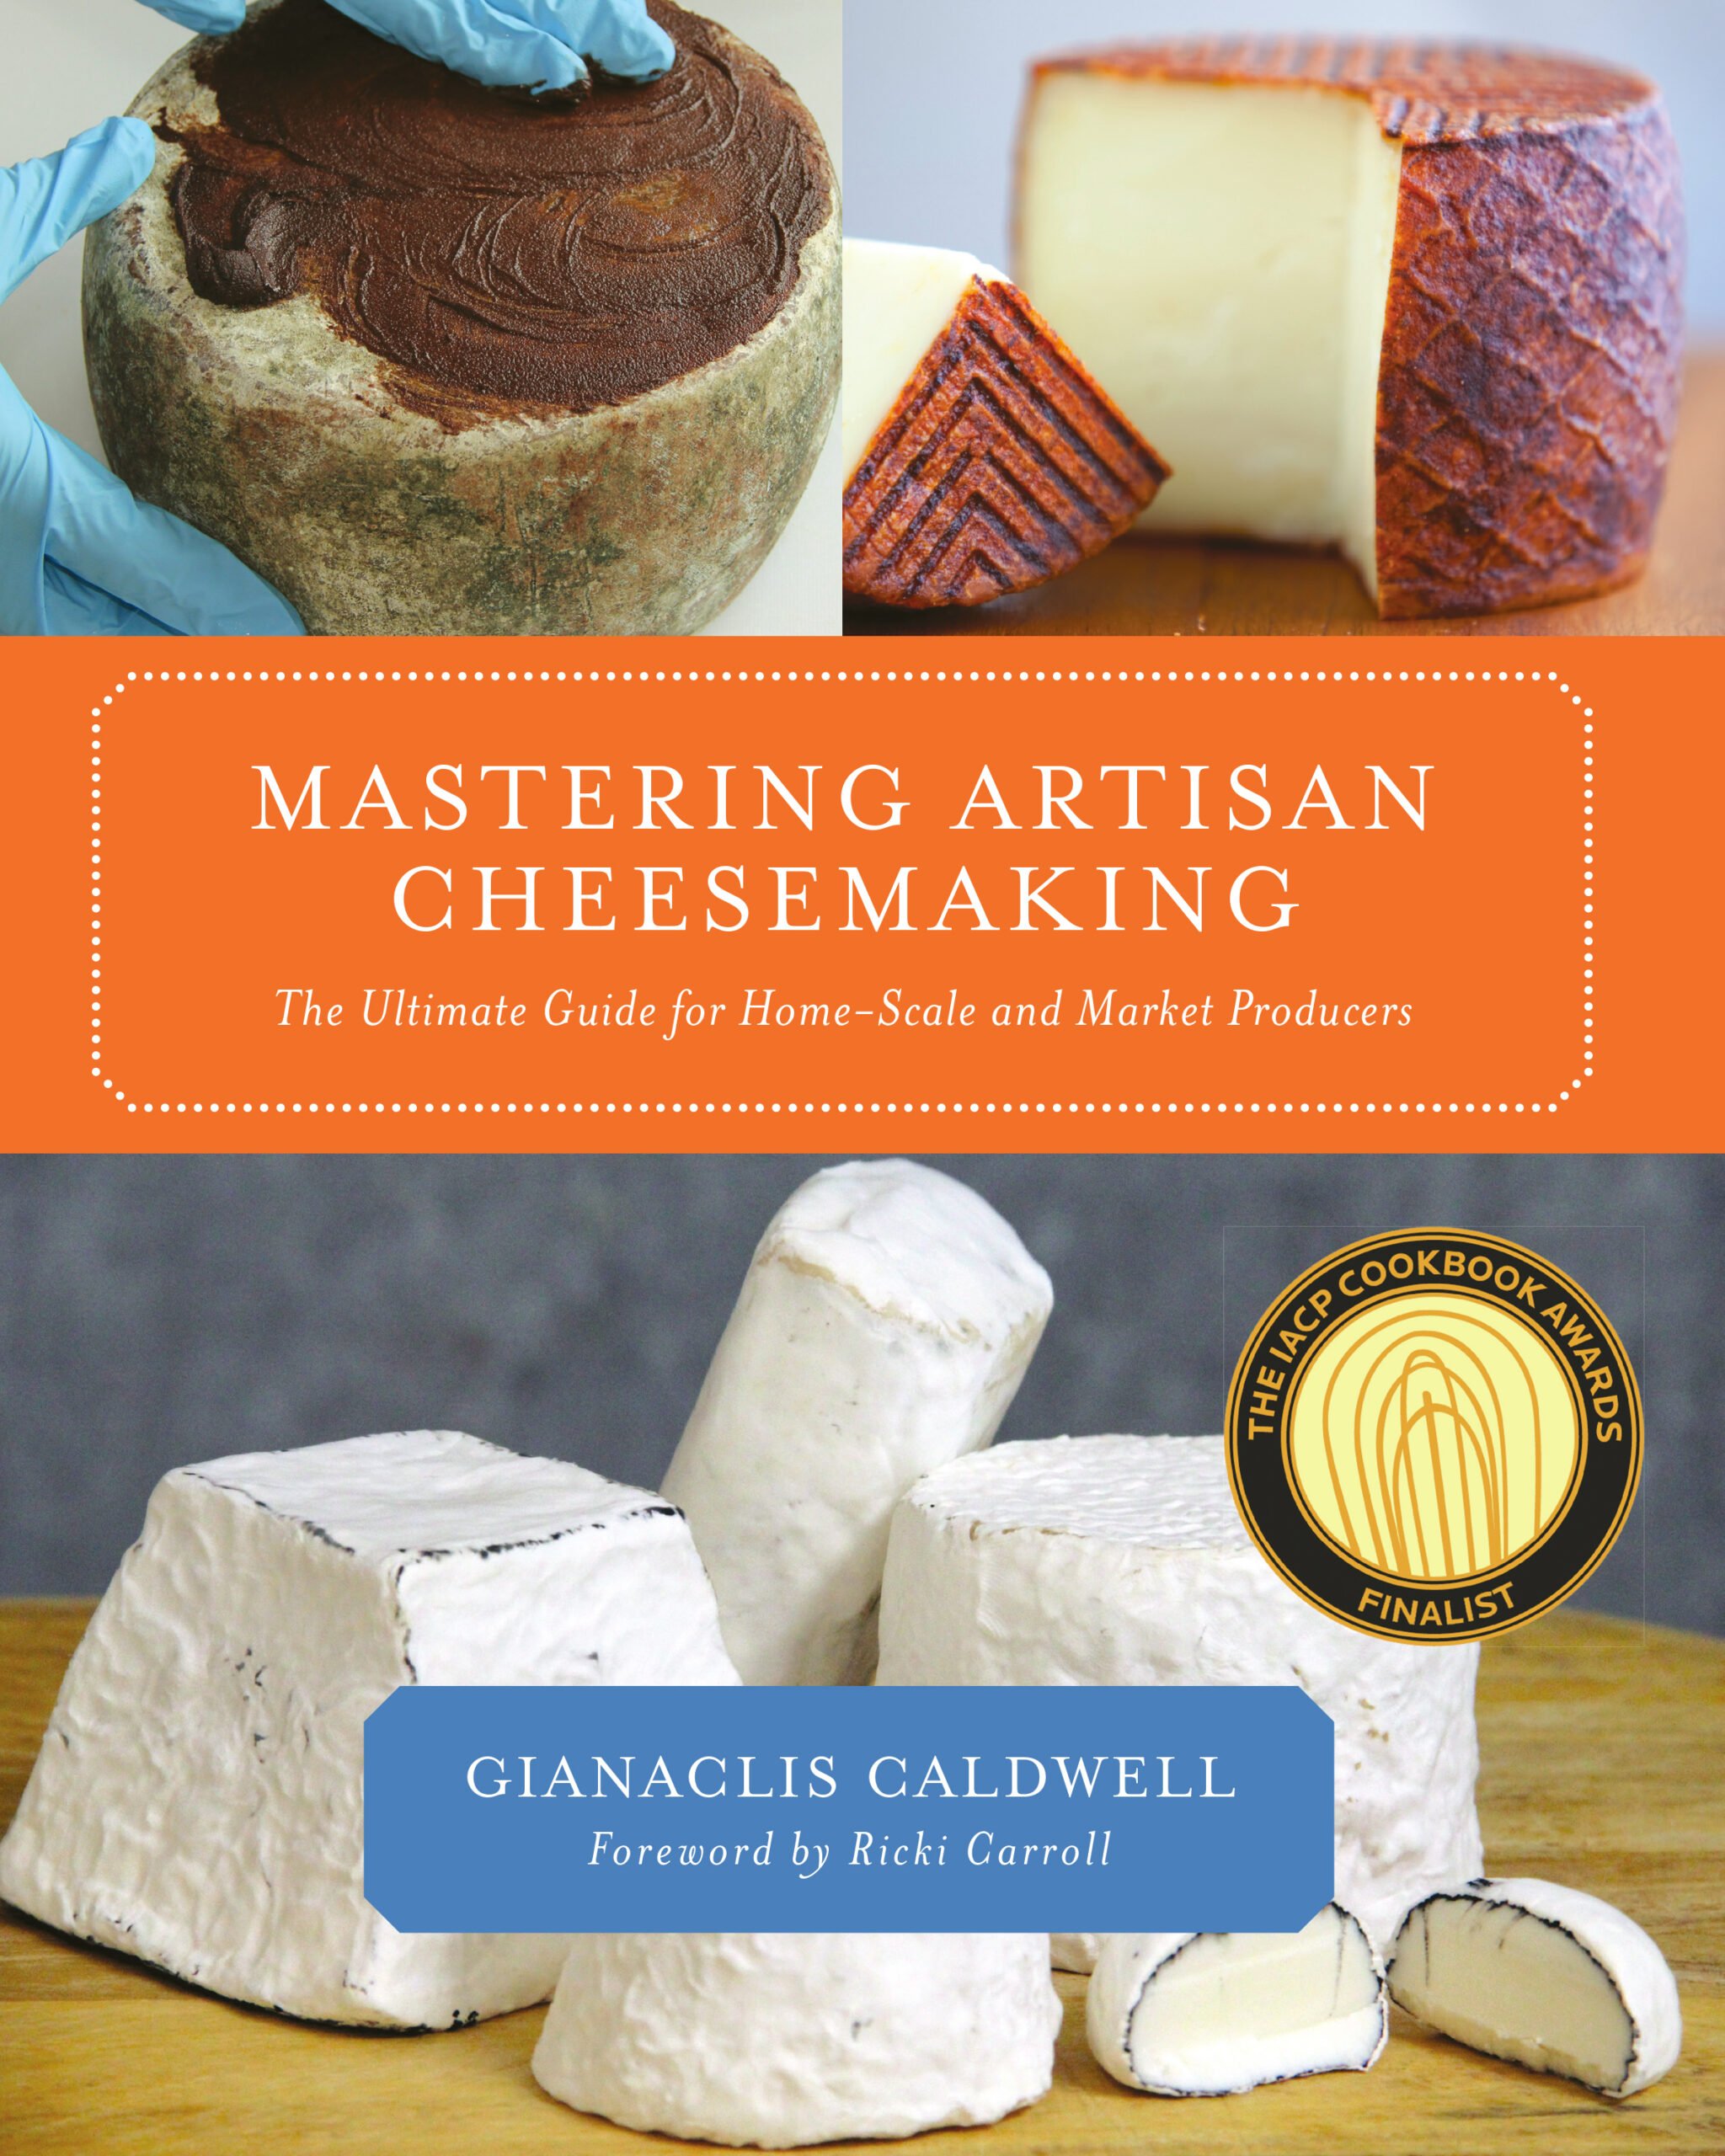 Mastering Artisan Cheesemaking: The Ultimate Guide for Home-Scale and Market Producers [Book]